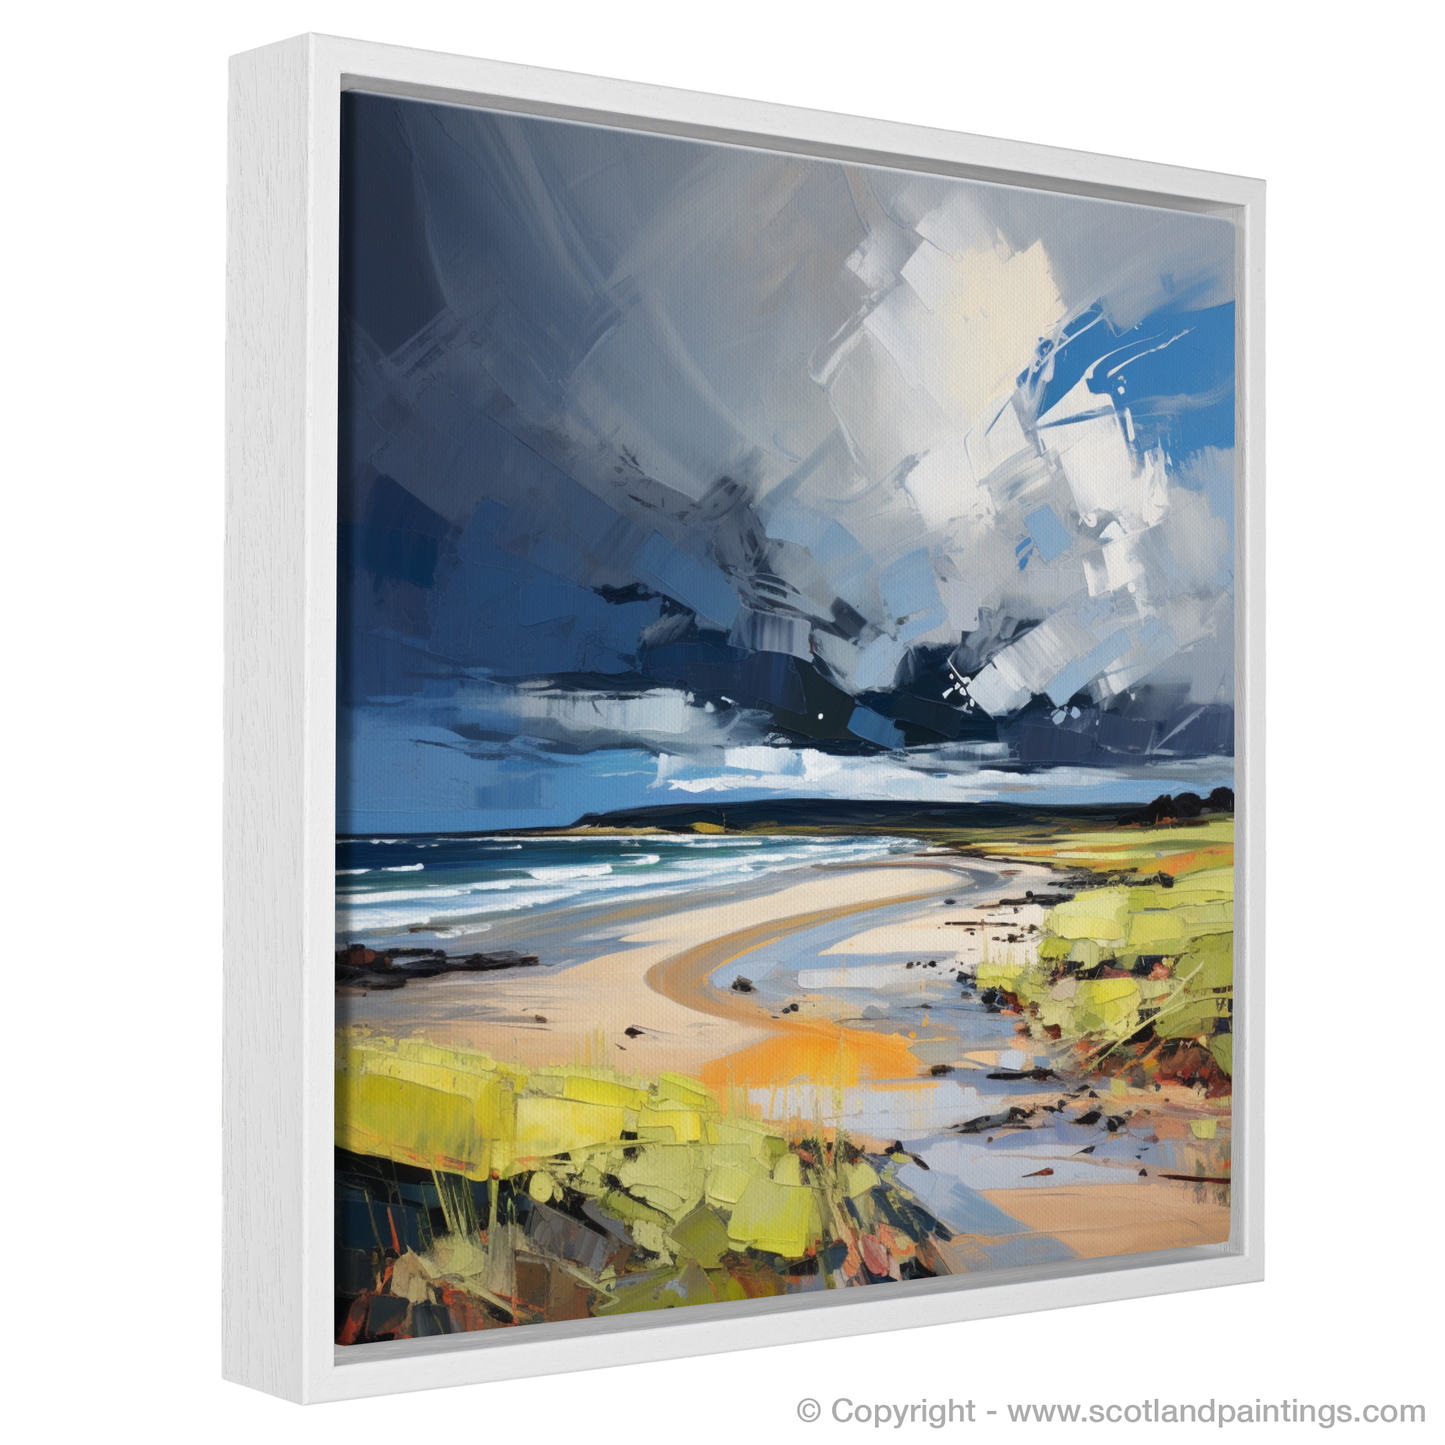 Painting and Art Print of Gullane Beach with a stormy sky entitled "Tempestuous Gullane: An Expressionist Ode to Scotland's Coastline".